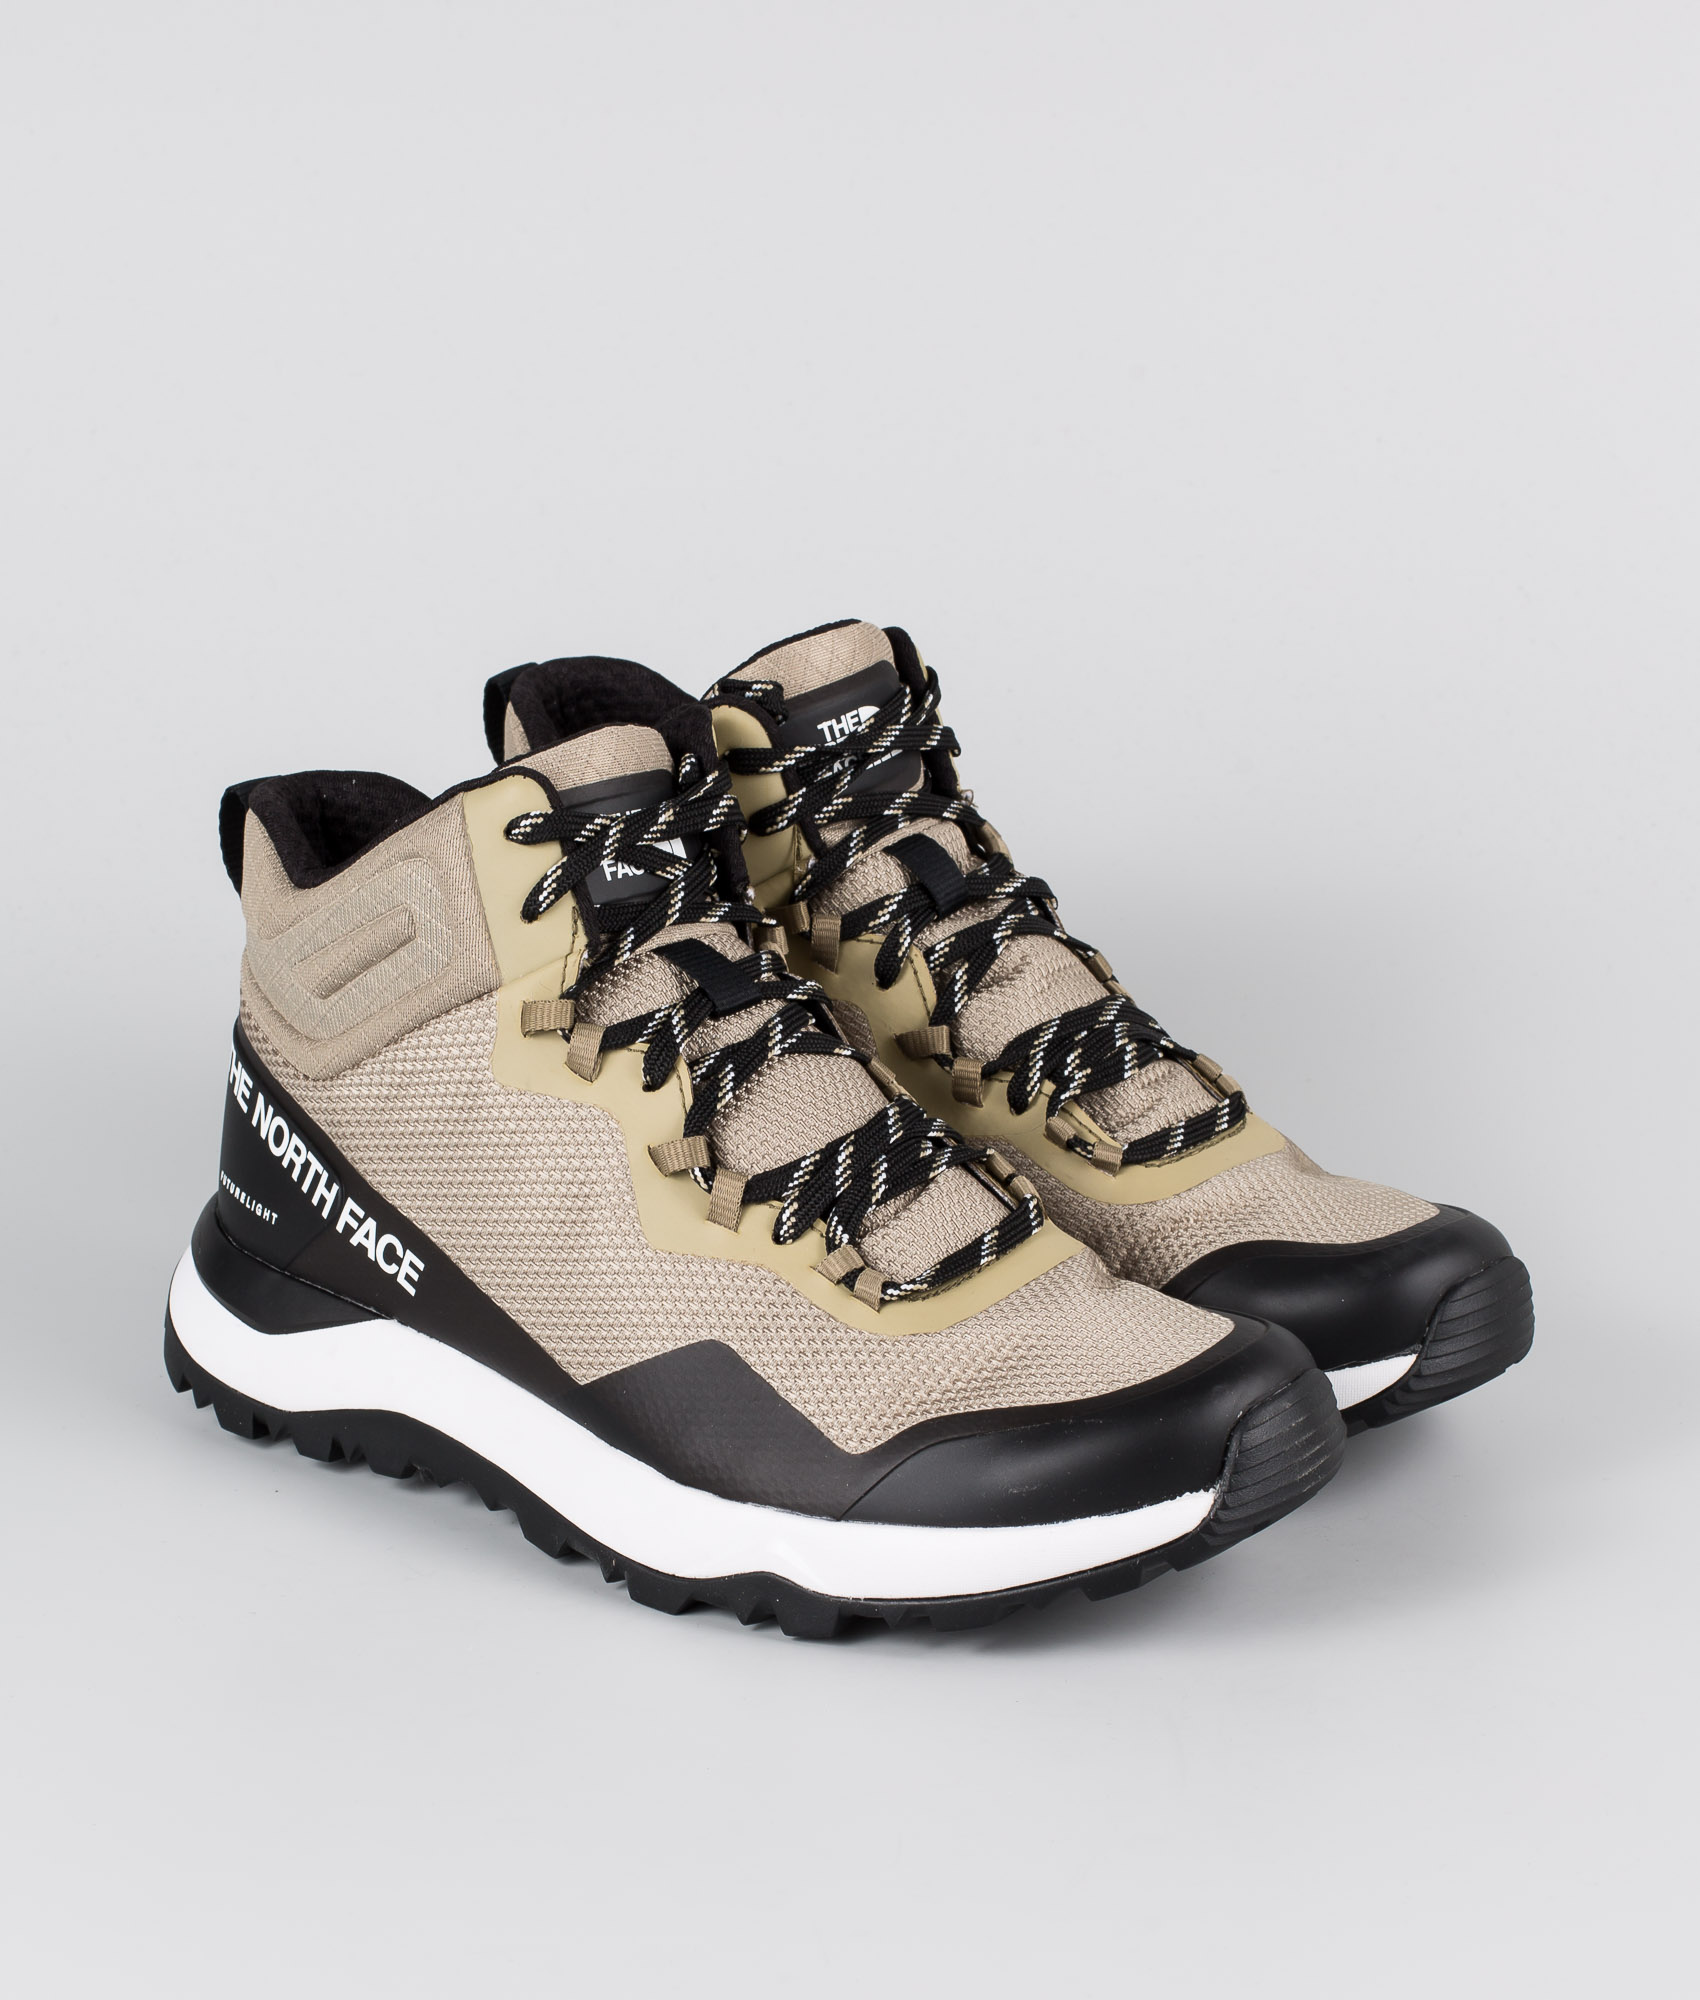 waterproof trainers north face